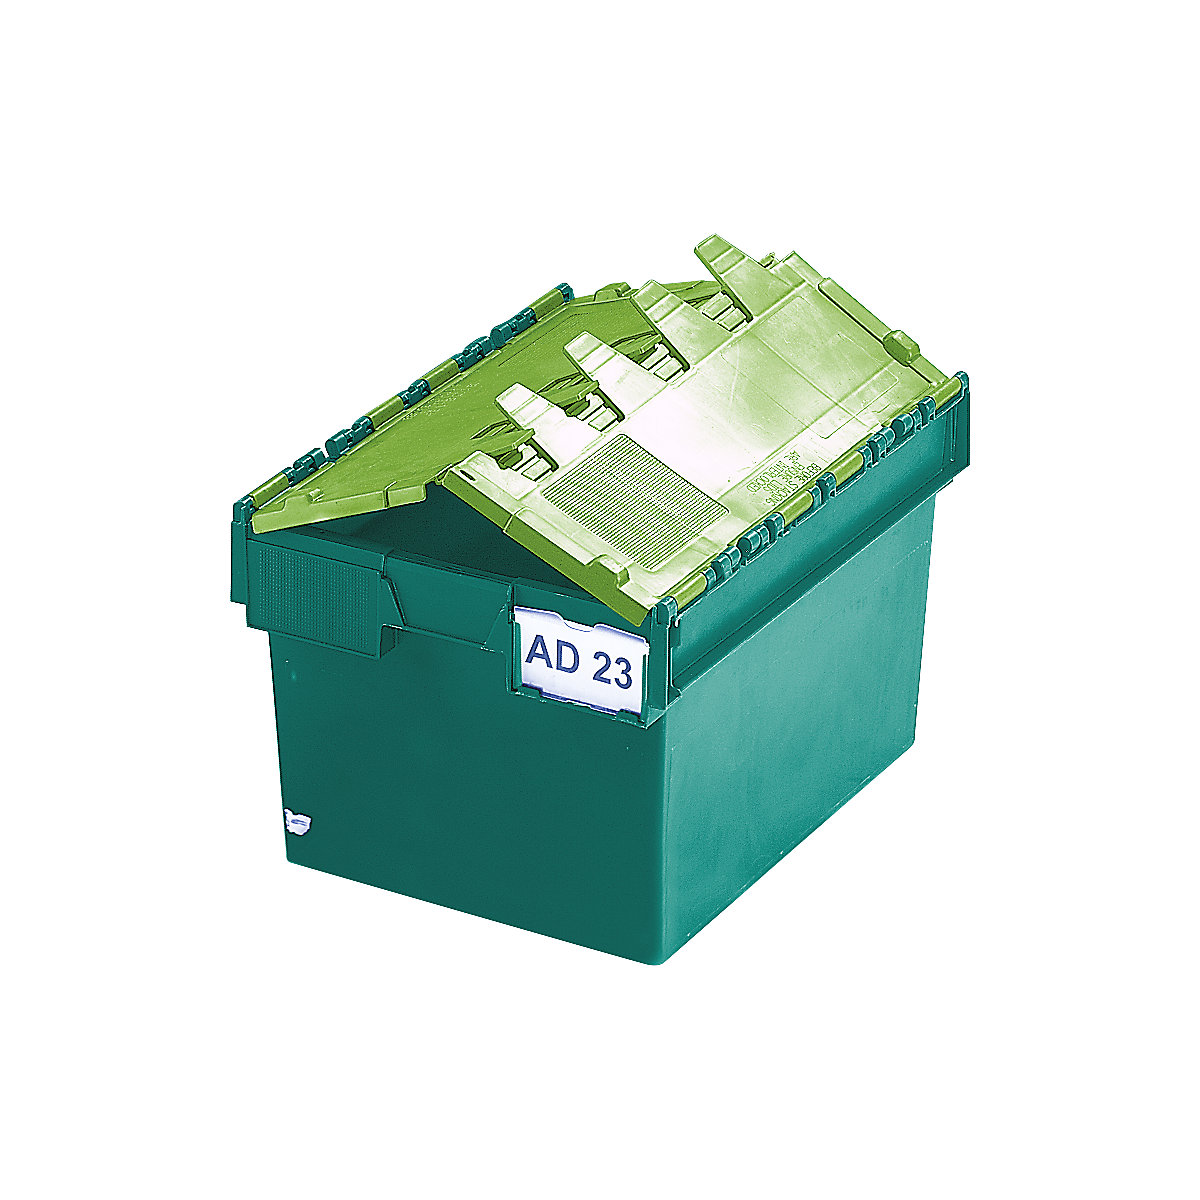 KAIMAN reusable stacking container, capacity 54 litres, LxWxH 600 x 400 x 320 mm, green, 10+ items